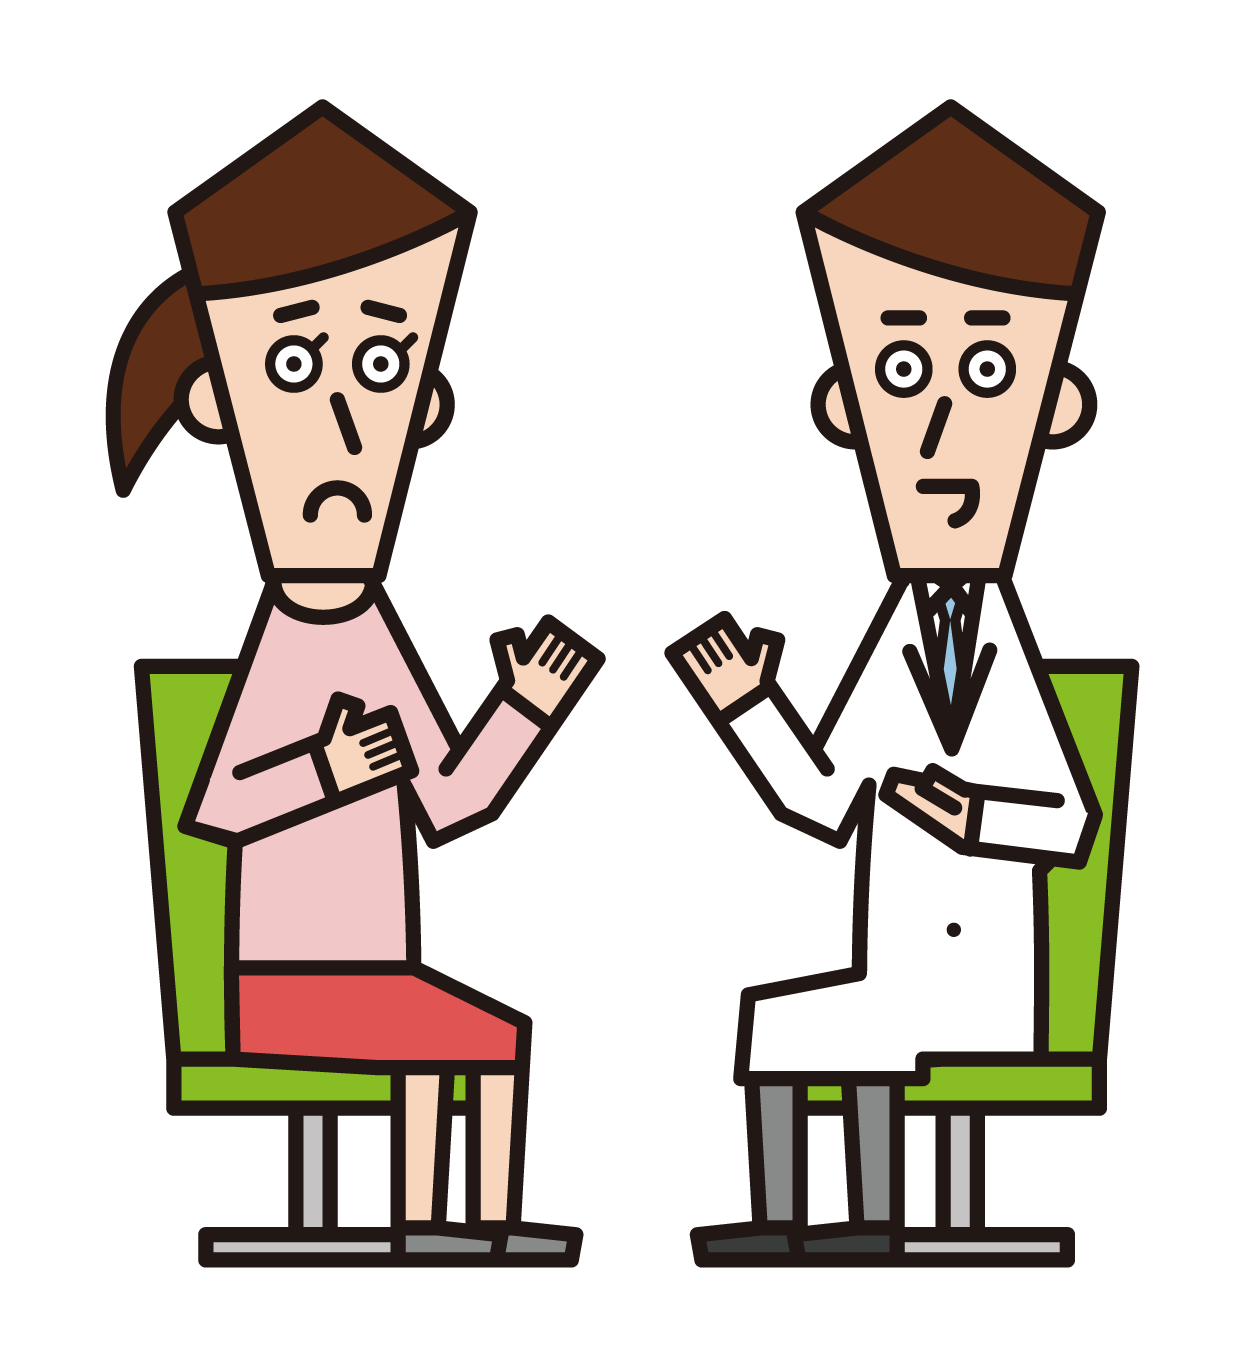 Illustration of a psychological counselor and clinical psychologist (male)